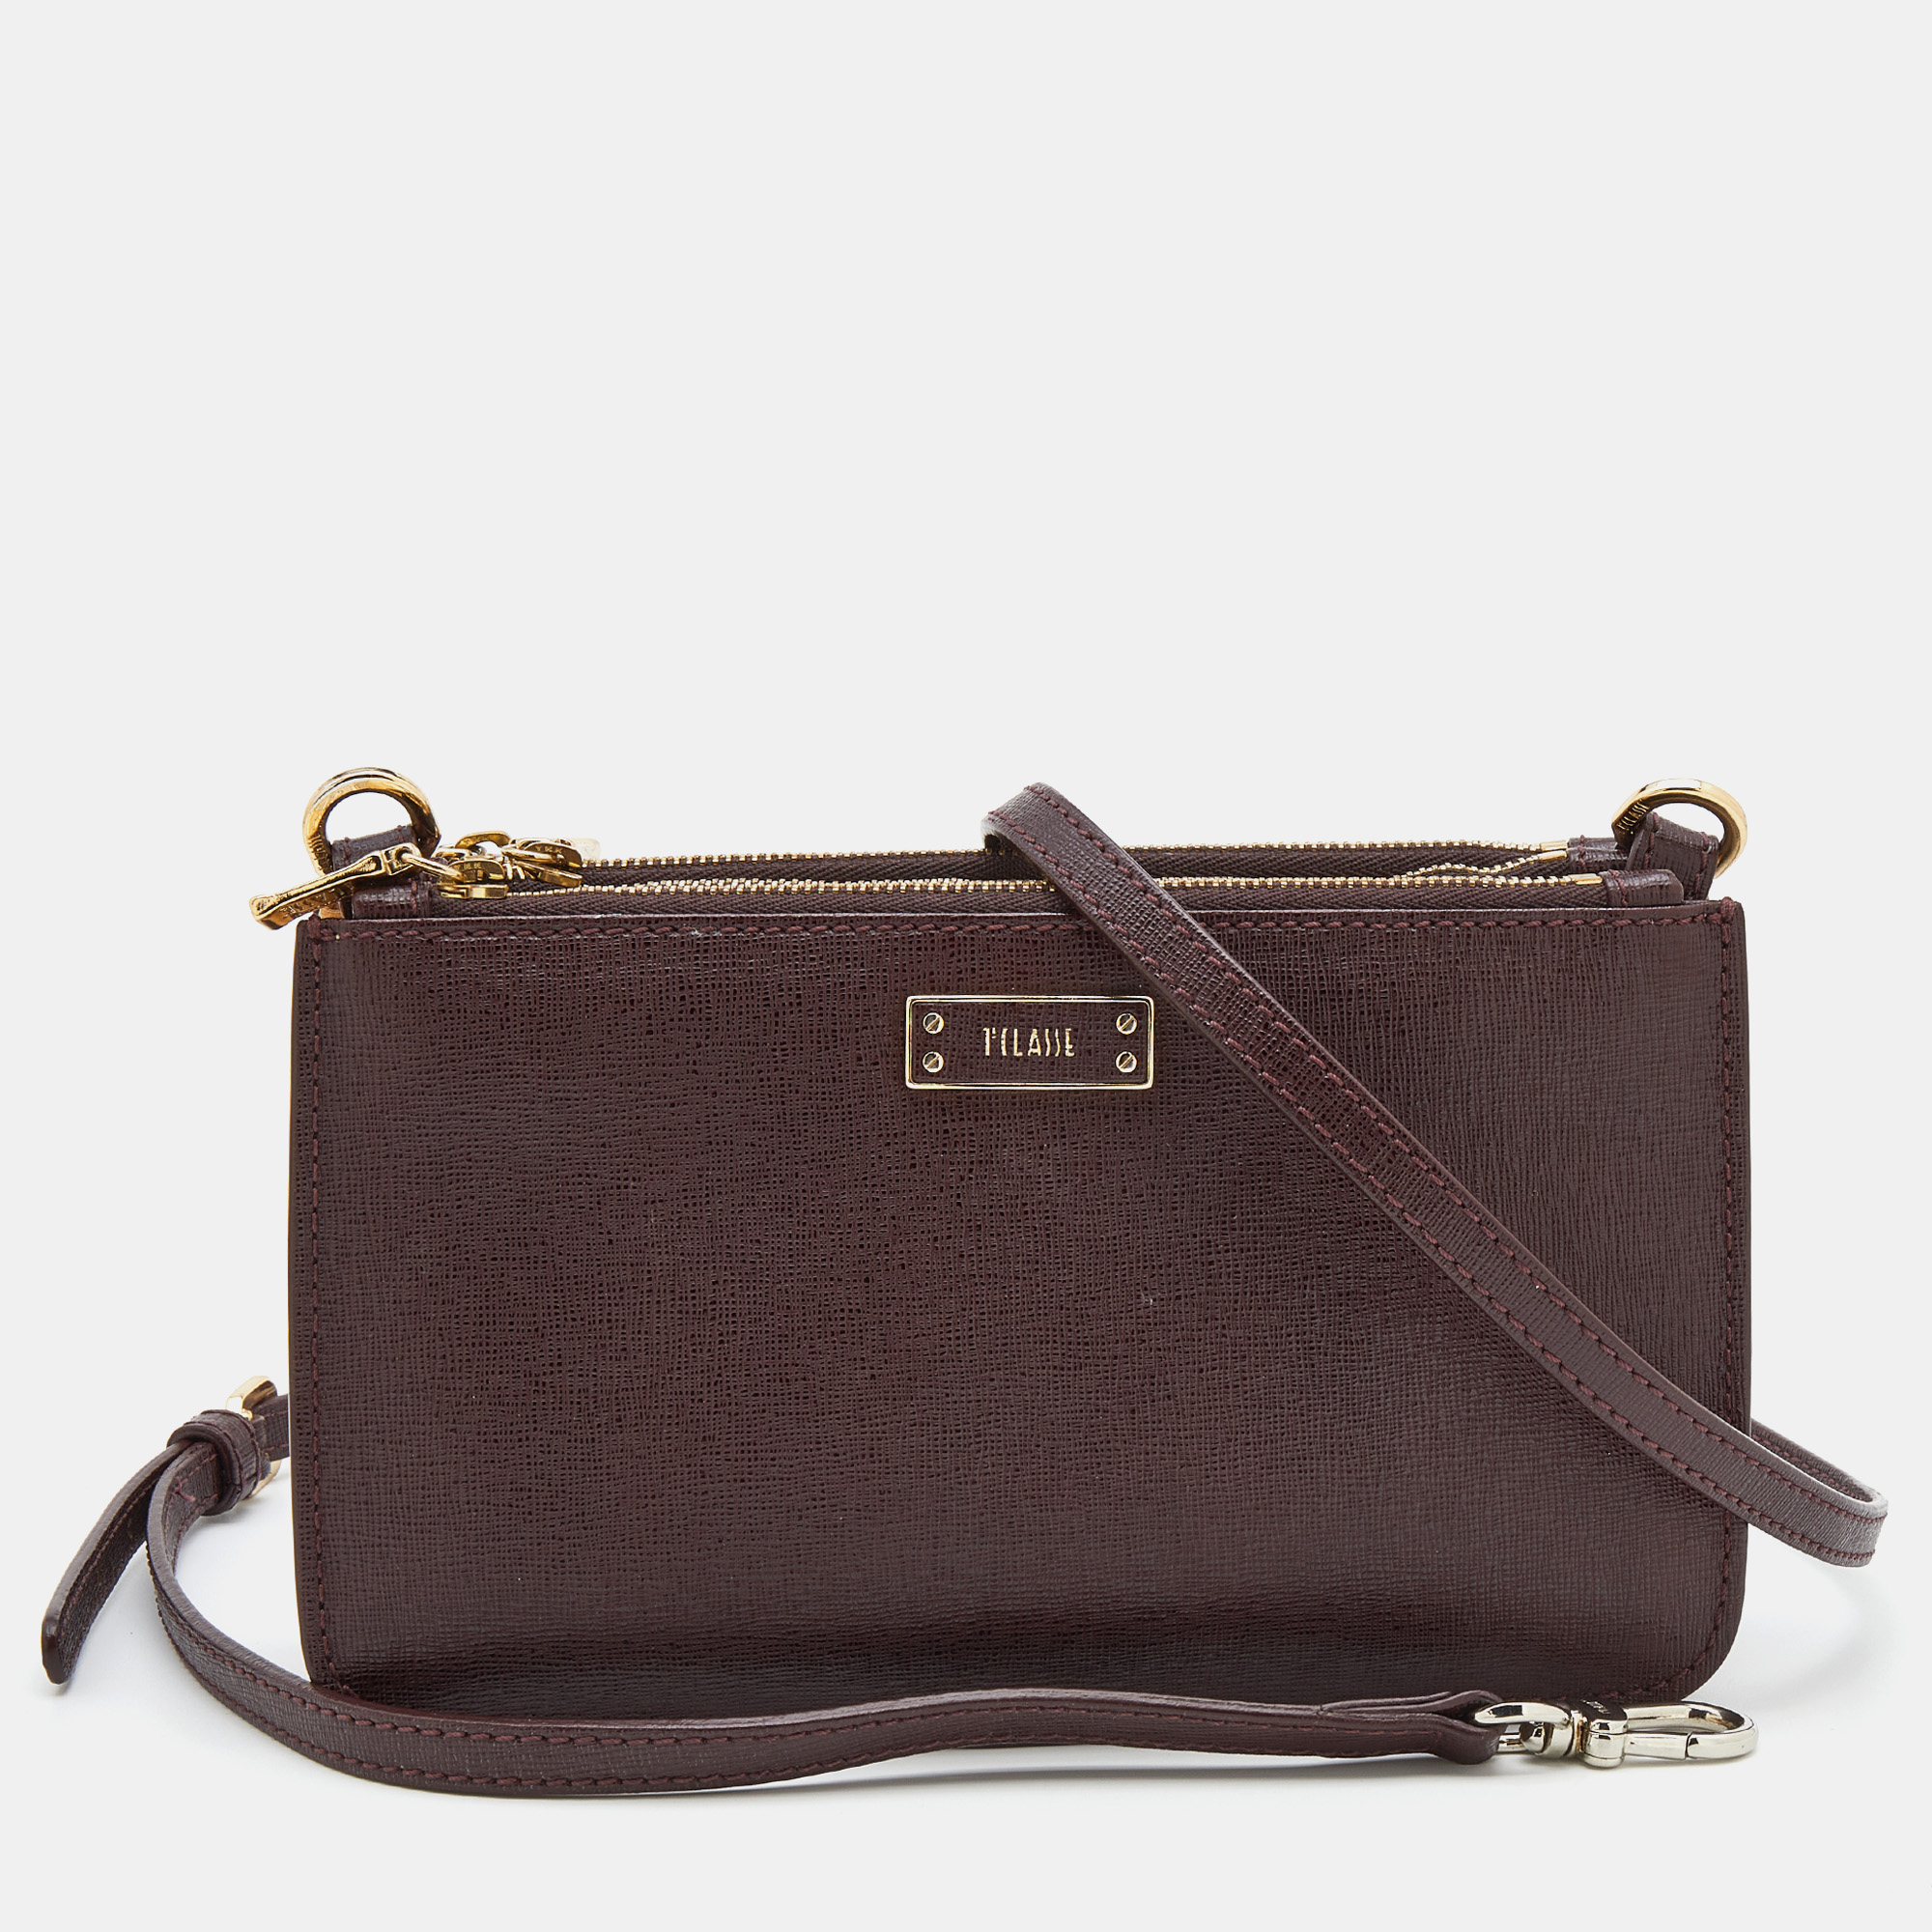 

Alivero Martini 1A Classe Burgundy/Beige Leather and Coated Canvas Zip Crossbody Bag